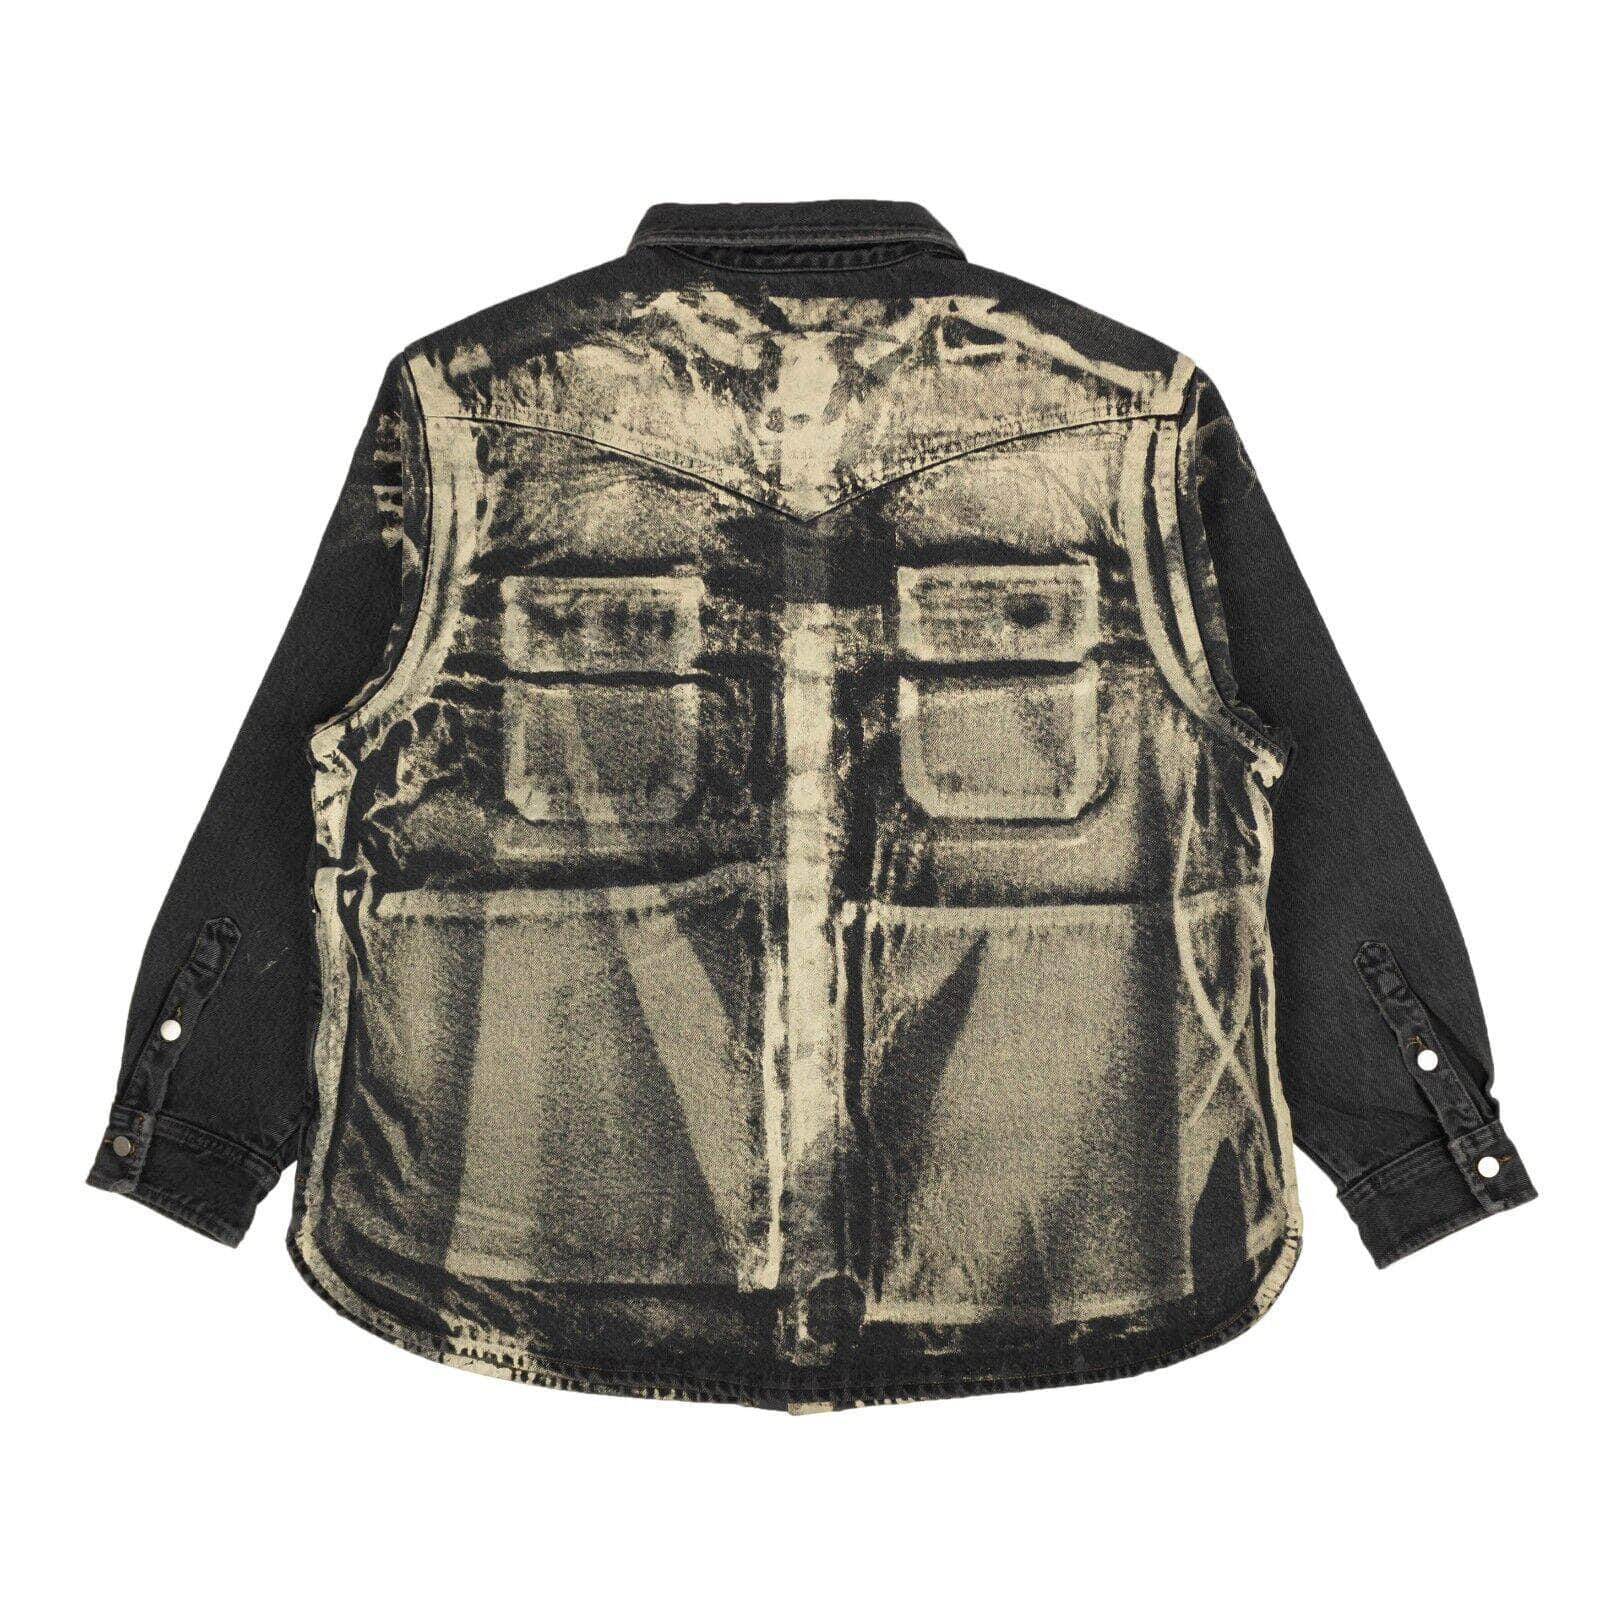 424 ON FAIRFAX 424-on-fairfax, 500-750, channelenable-all, chicmi, couponcollection, gender-mens, main-clothing, mens-shoes, size-l, size-m, size-s, size-xl Black Painted White Denim Workshirt